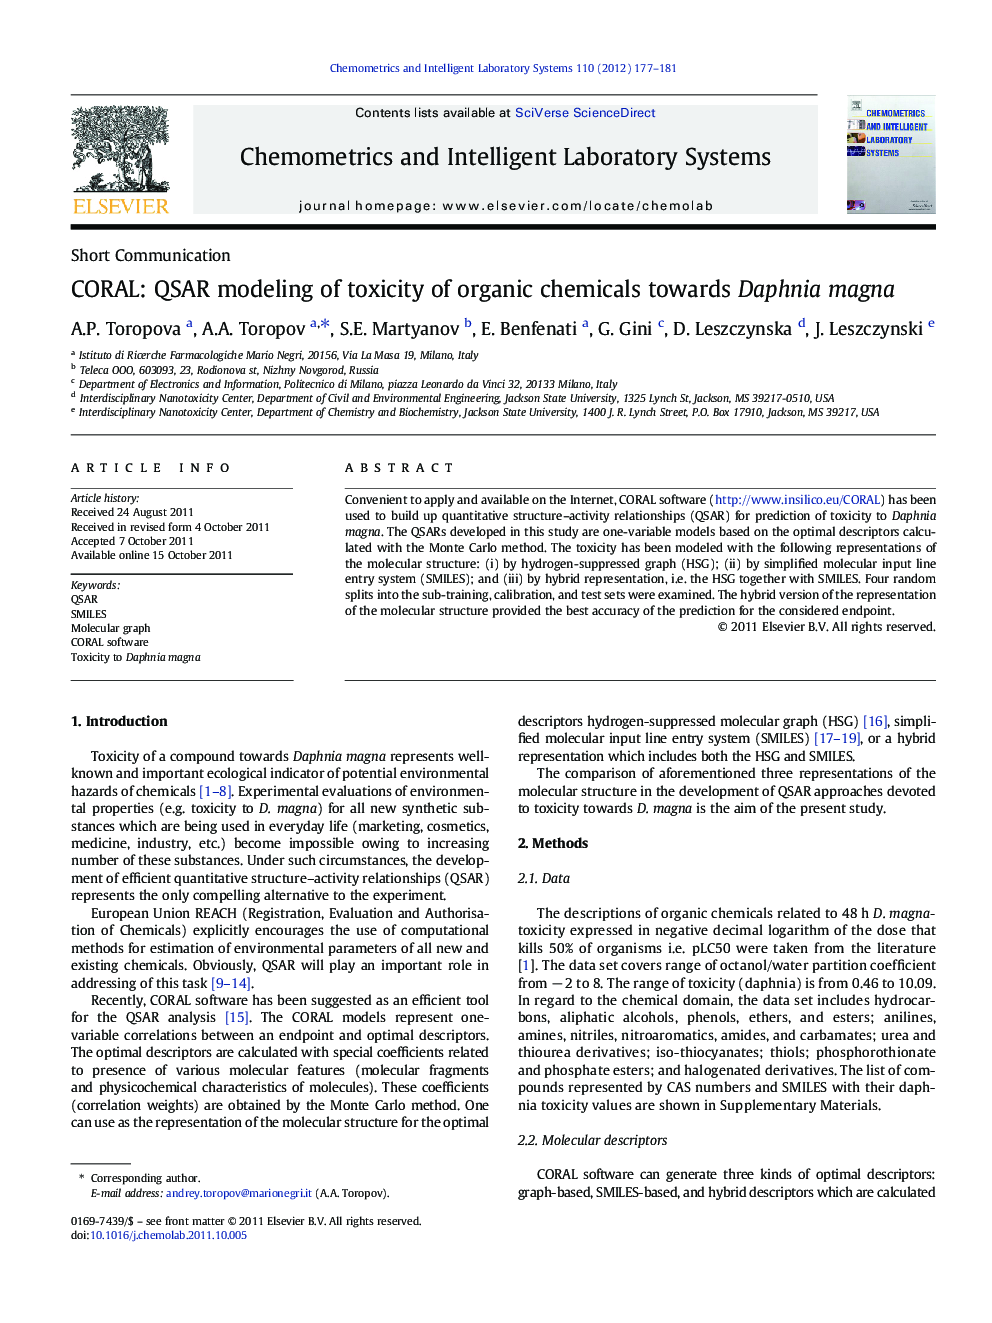 CORAL: QSAR modeling of toxicity of organic chemicals towards Daphnia magna